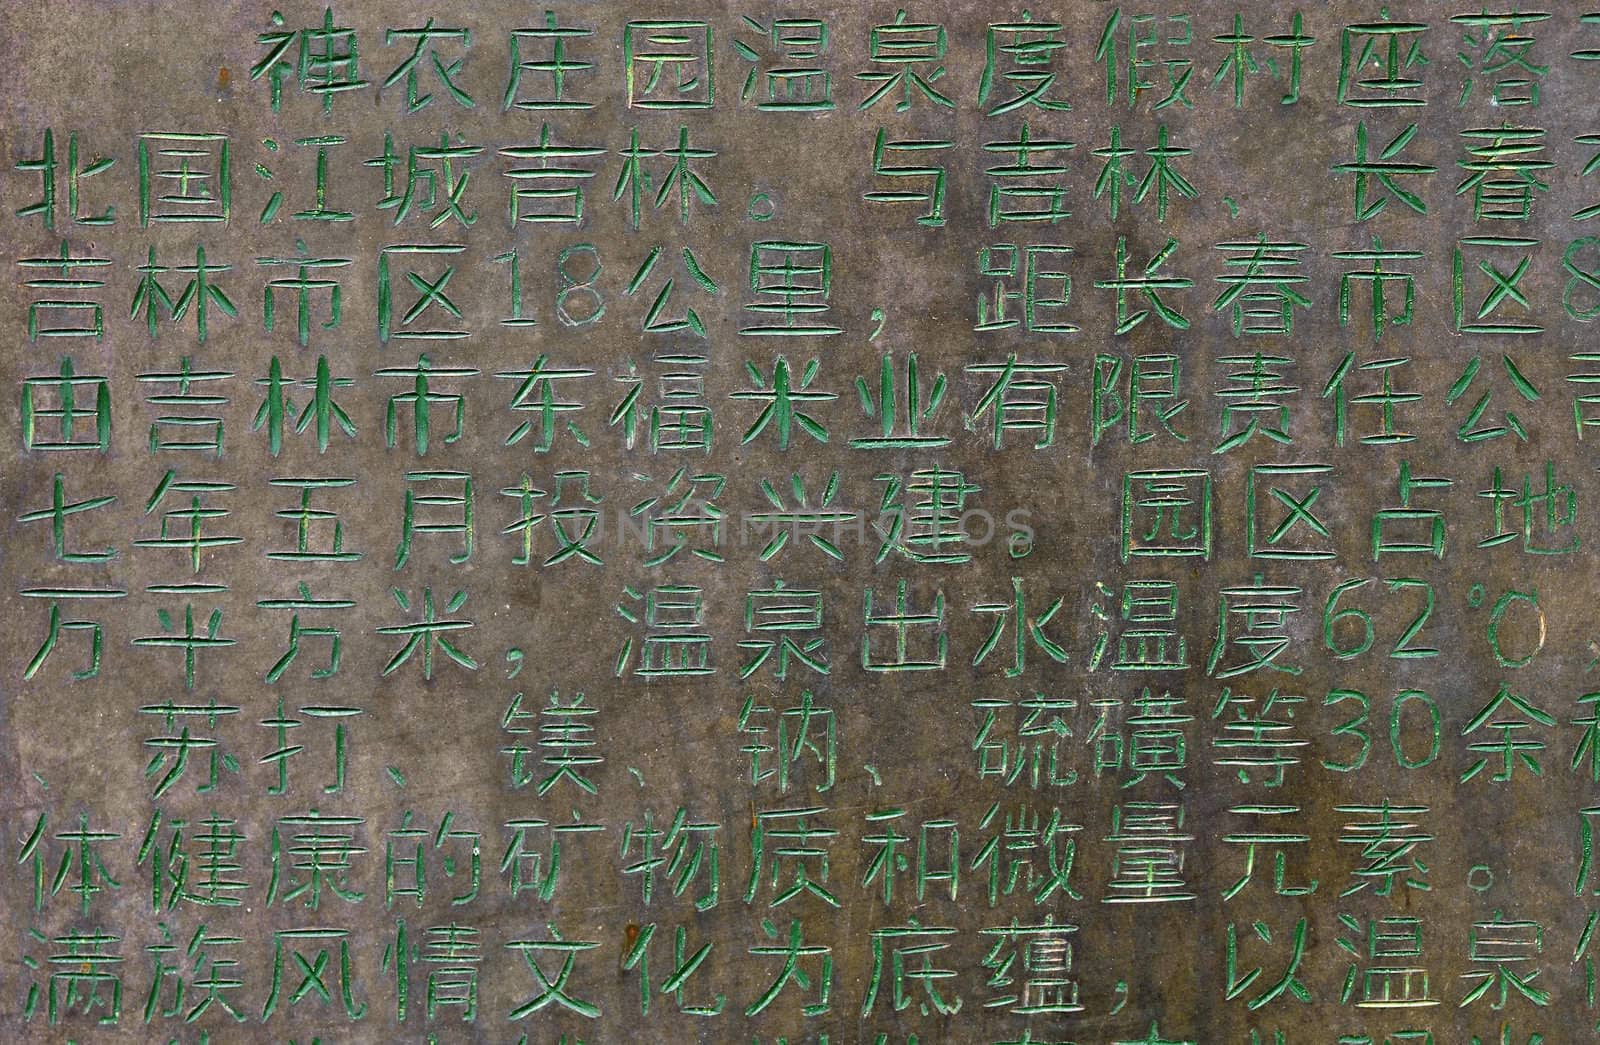 Chinese letters by Vectorex